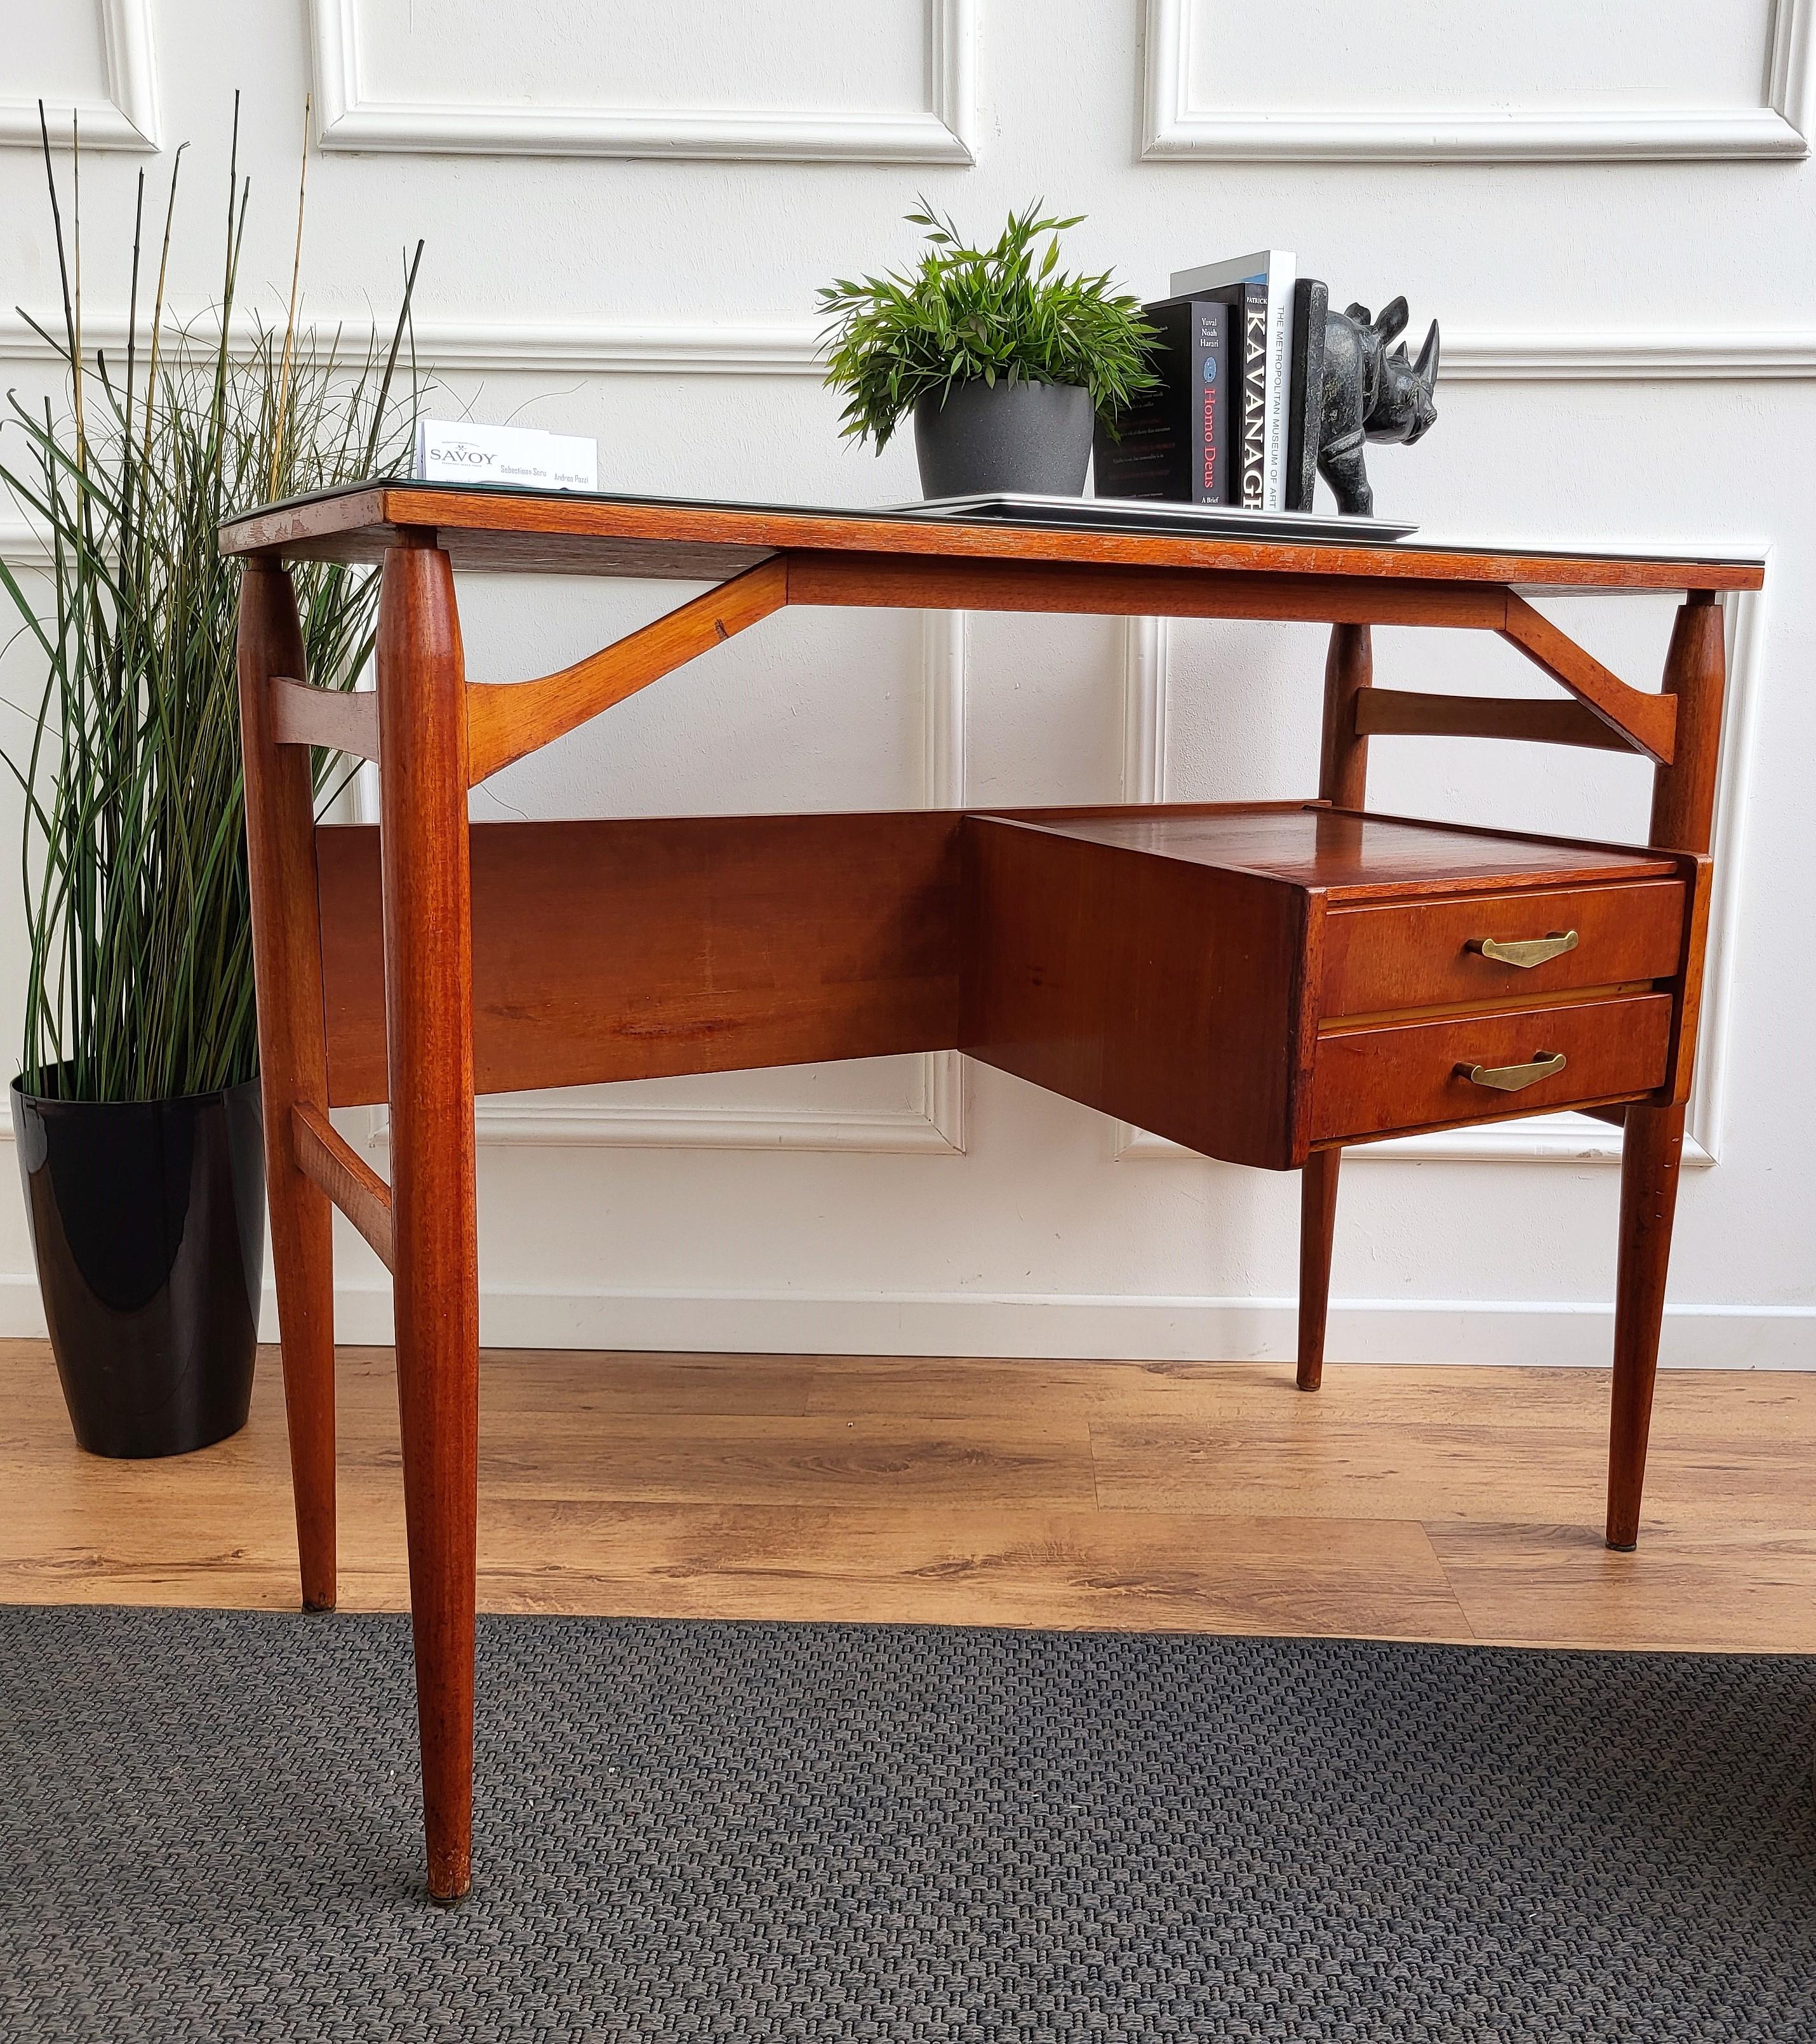 Very elegant Italian Art Deco Mid-Century Modern desk writing table, with black glass top and beautiful 4 side carved legs and junctions with two floating side drawers drawers completed with great brass handles. The unique and typical design, with